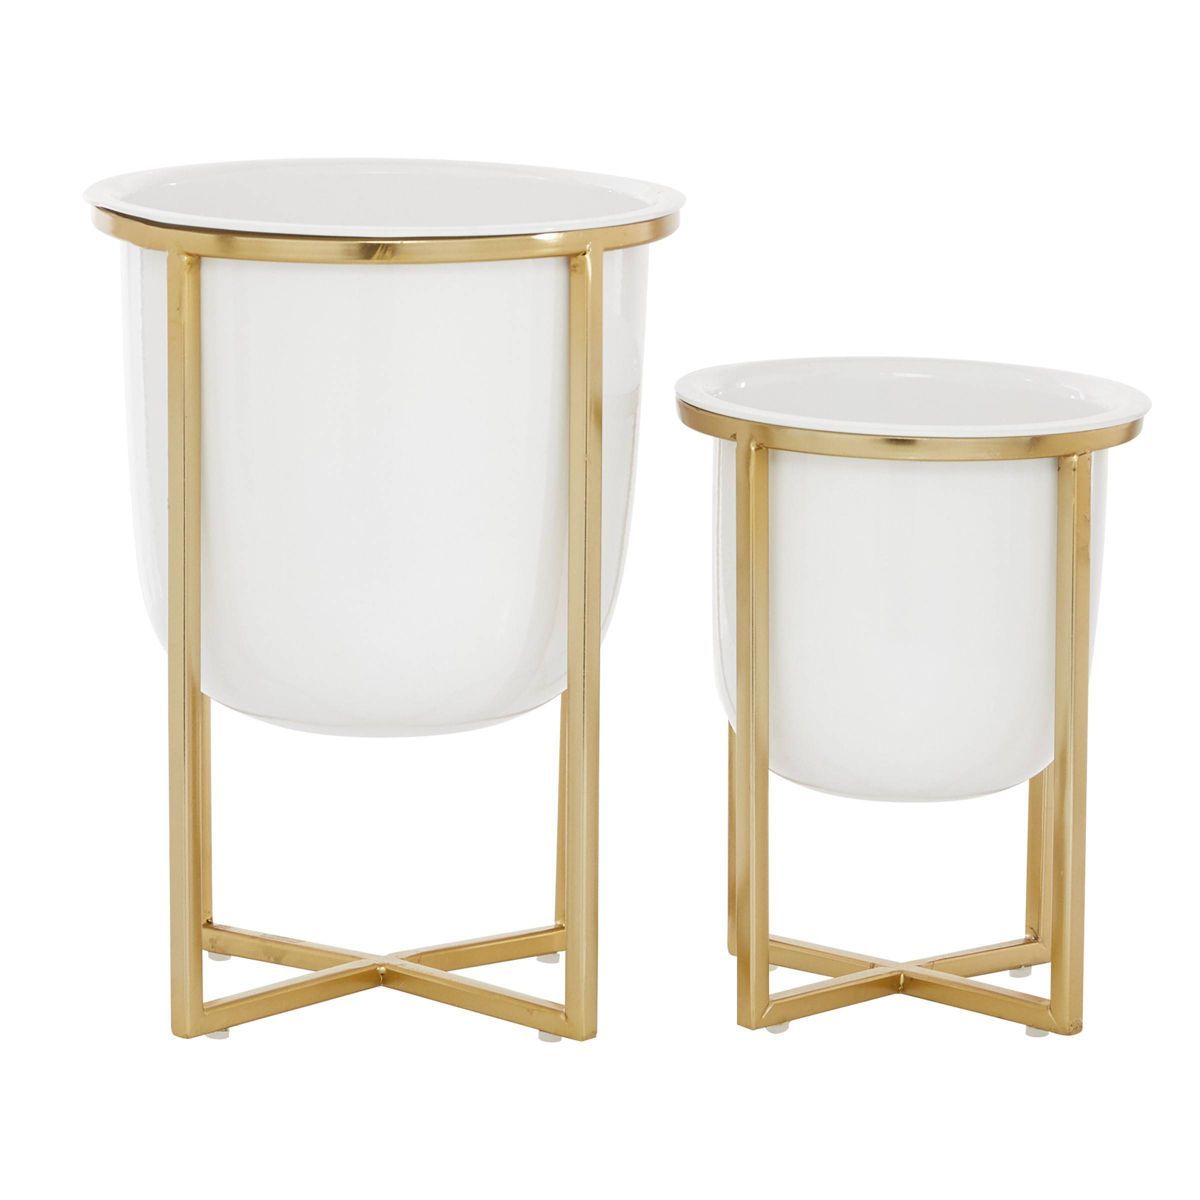 Set of 2 Planters with Metal Base White/Gold - CosmoLiving by Cosmopolitan | Target